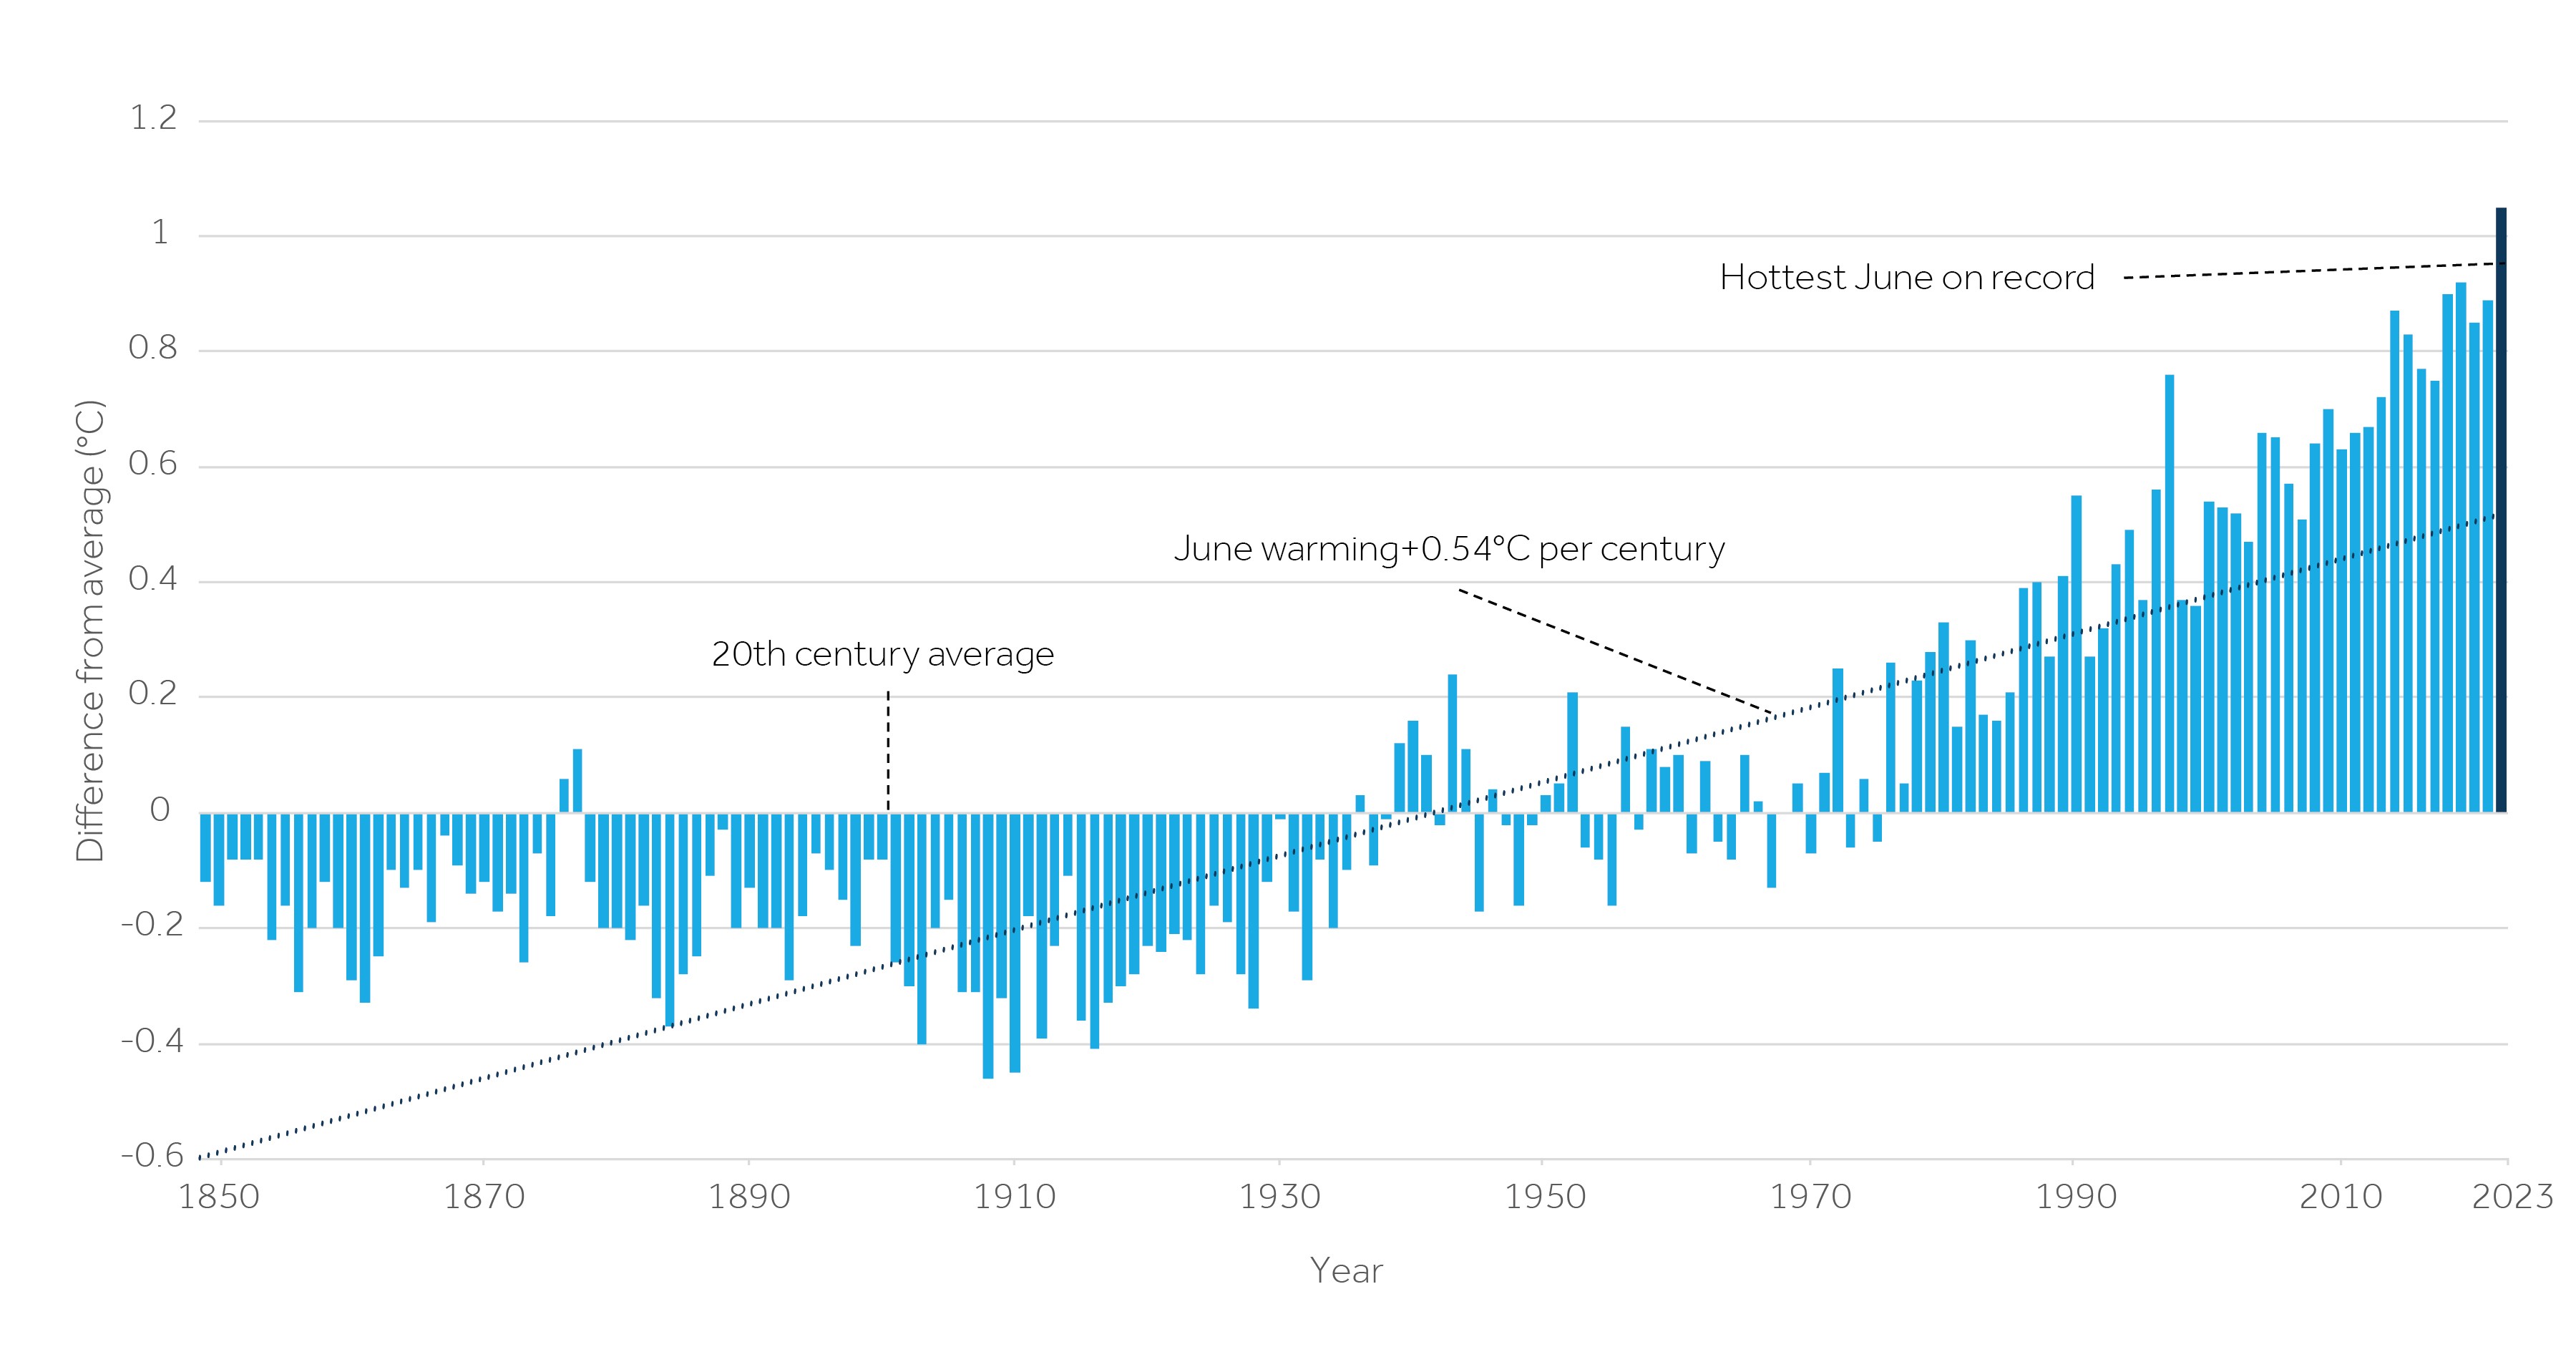 After over 40 years of global temperatures being above their average for the 20th century, June 2023 is the hottest on record